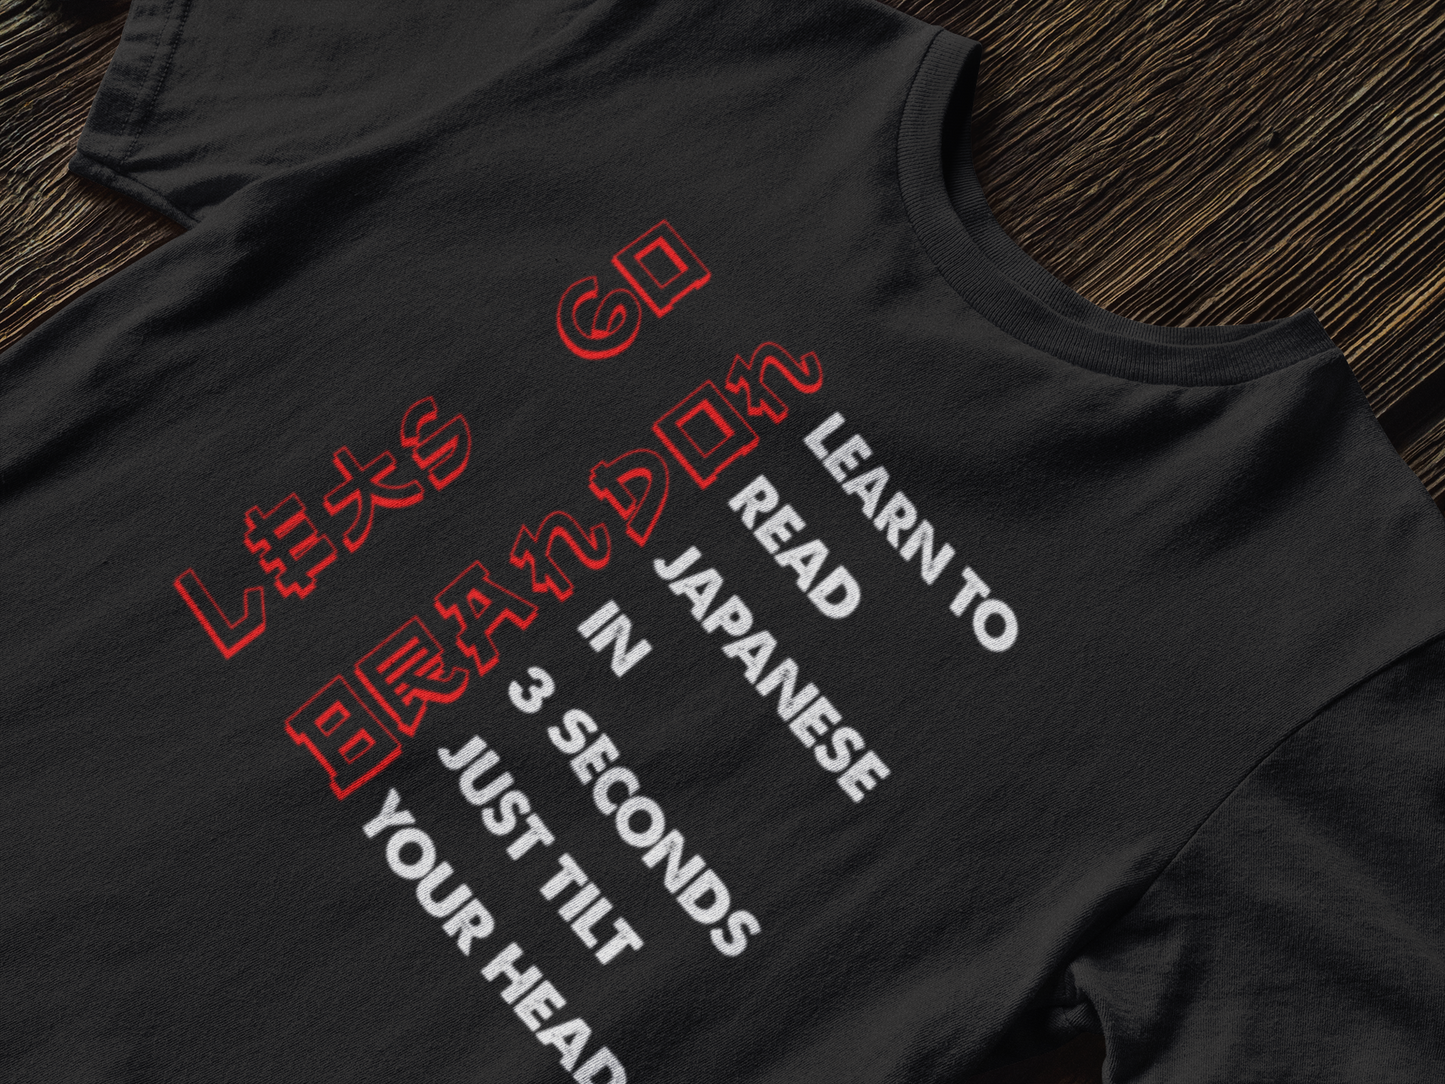 Learn to Read Japanese in 3 seconds-  Lets Go Brandon - JOE BIDEN  - Custom Graphic DTG Printed Cotton T Shirt